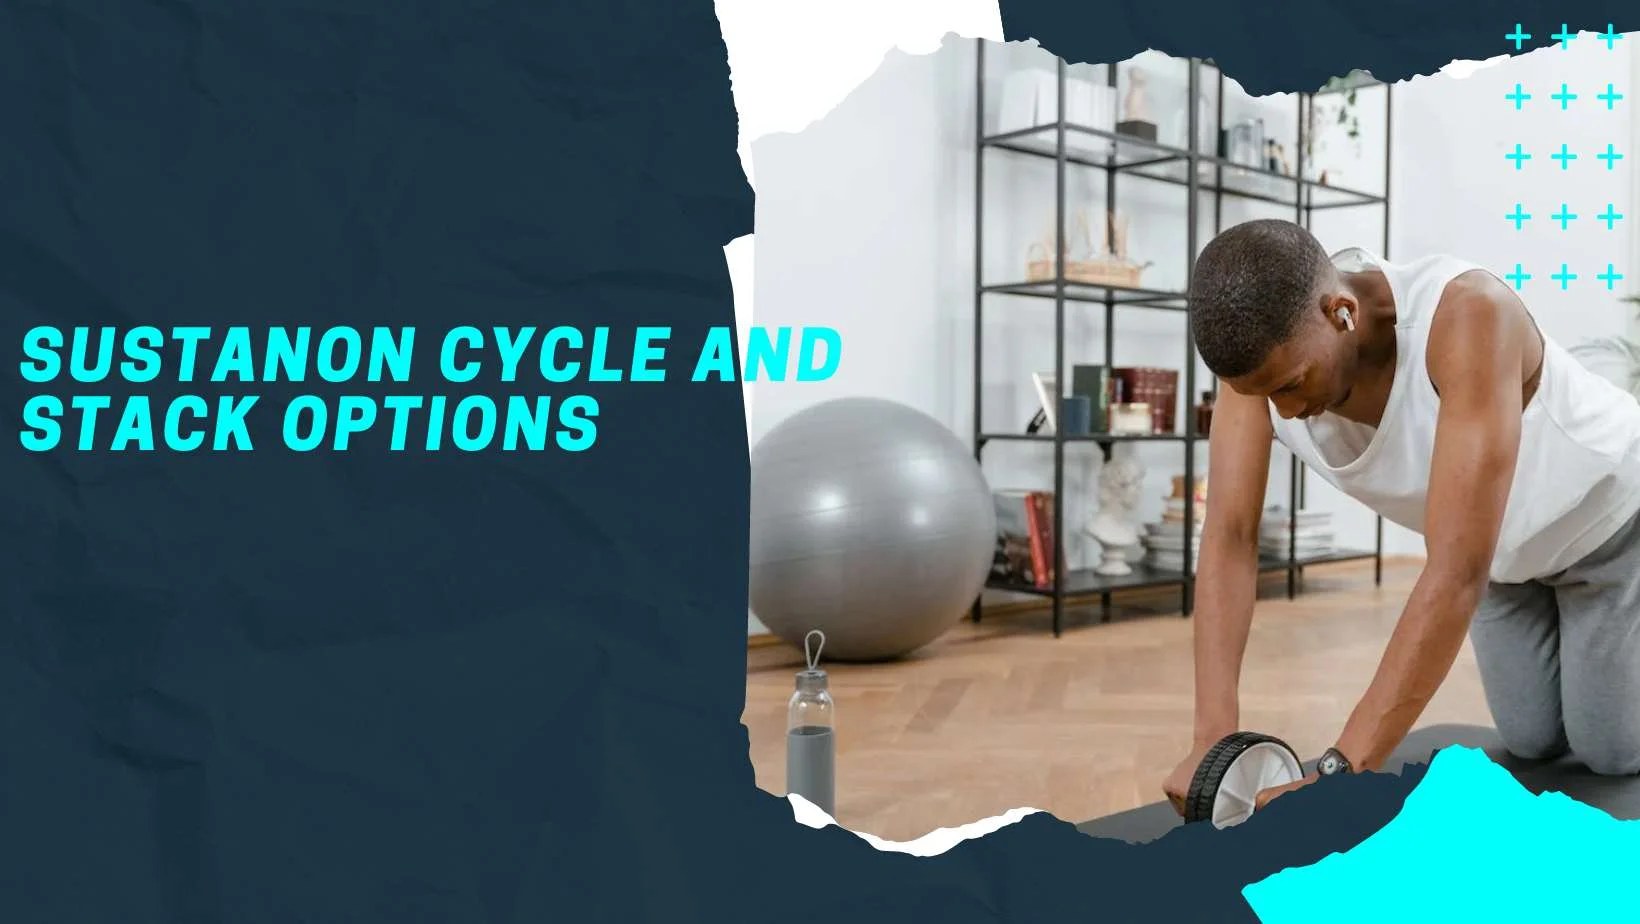 Sustanon Cycle and Stack Options